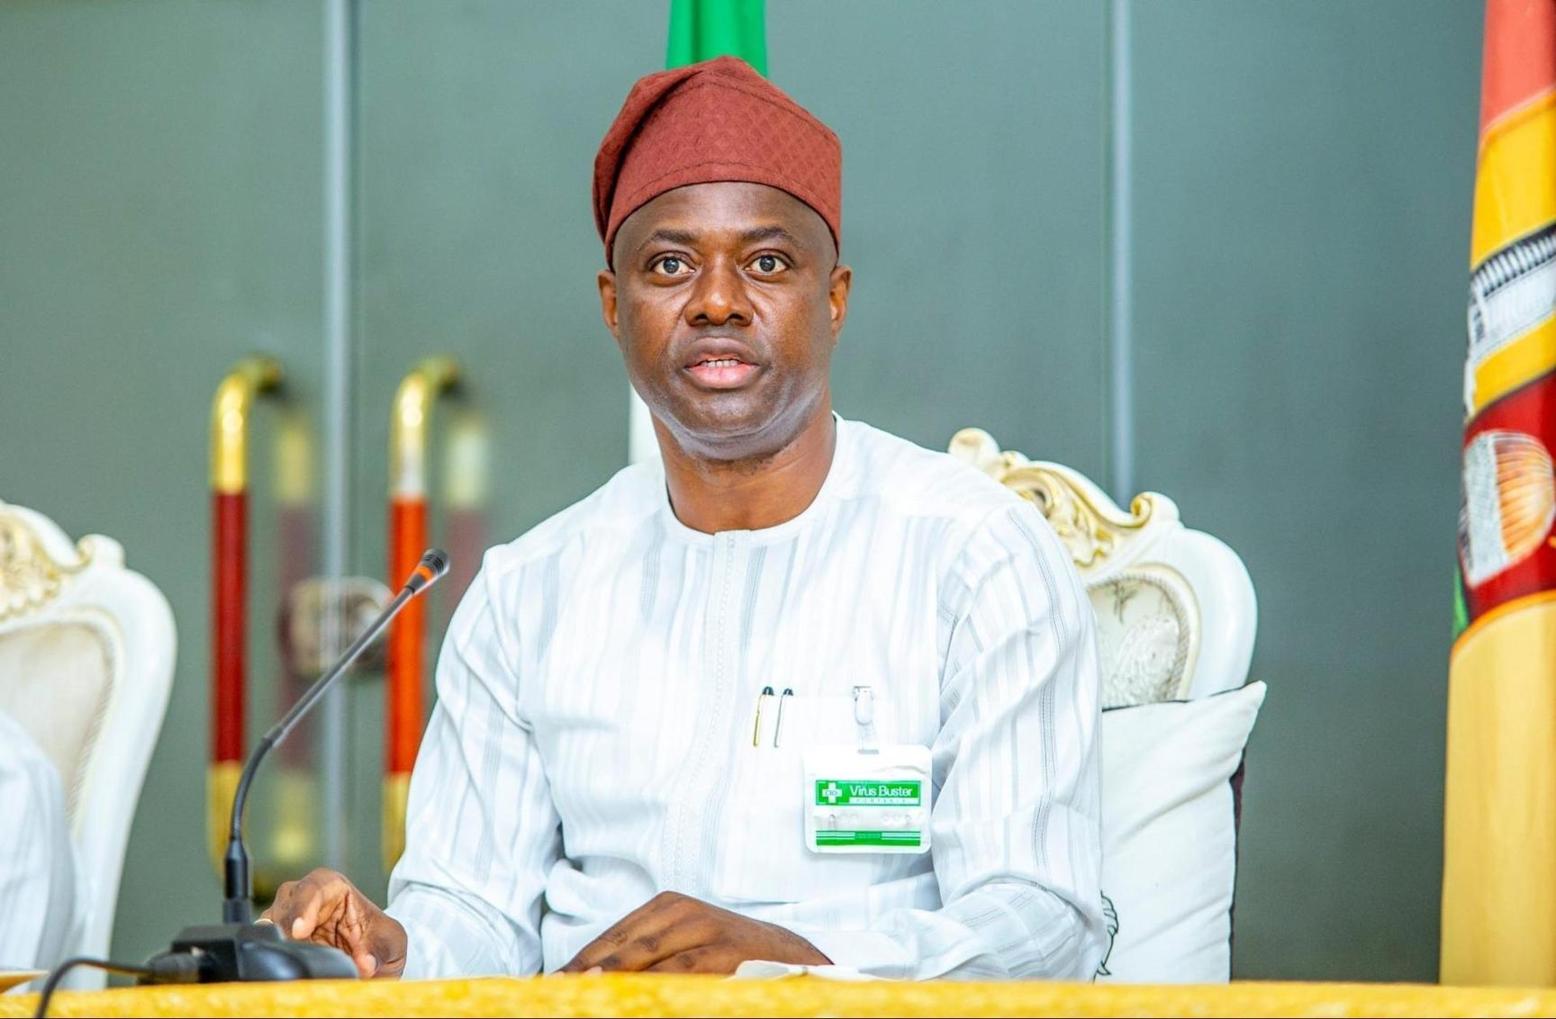 Return of schools to missionaries: ‘You shall sleep no more’ – Islamic group gives Gov Makinde quit notice